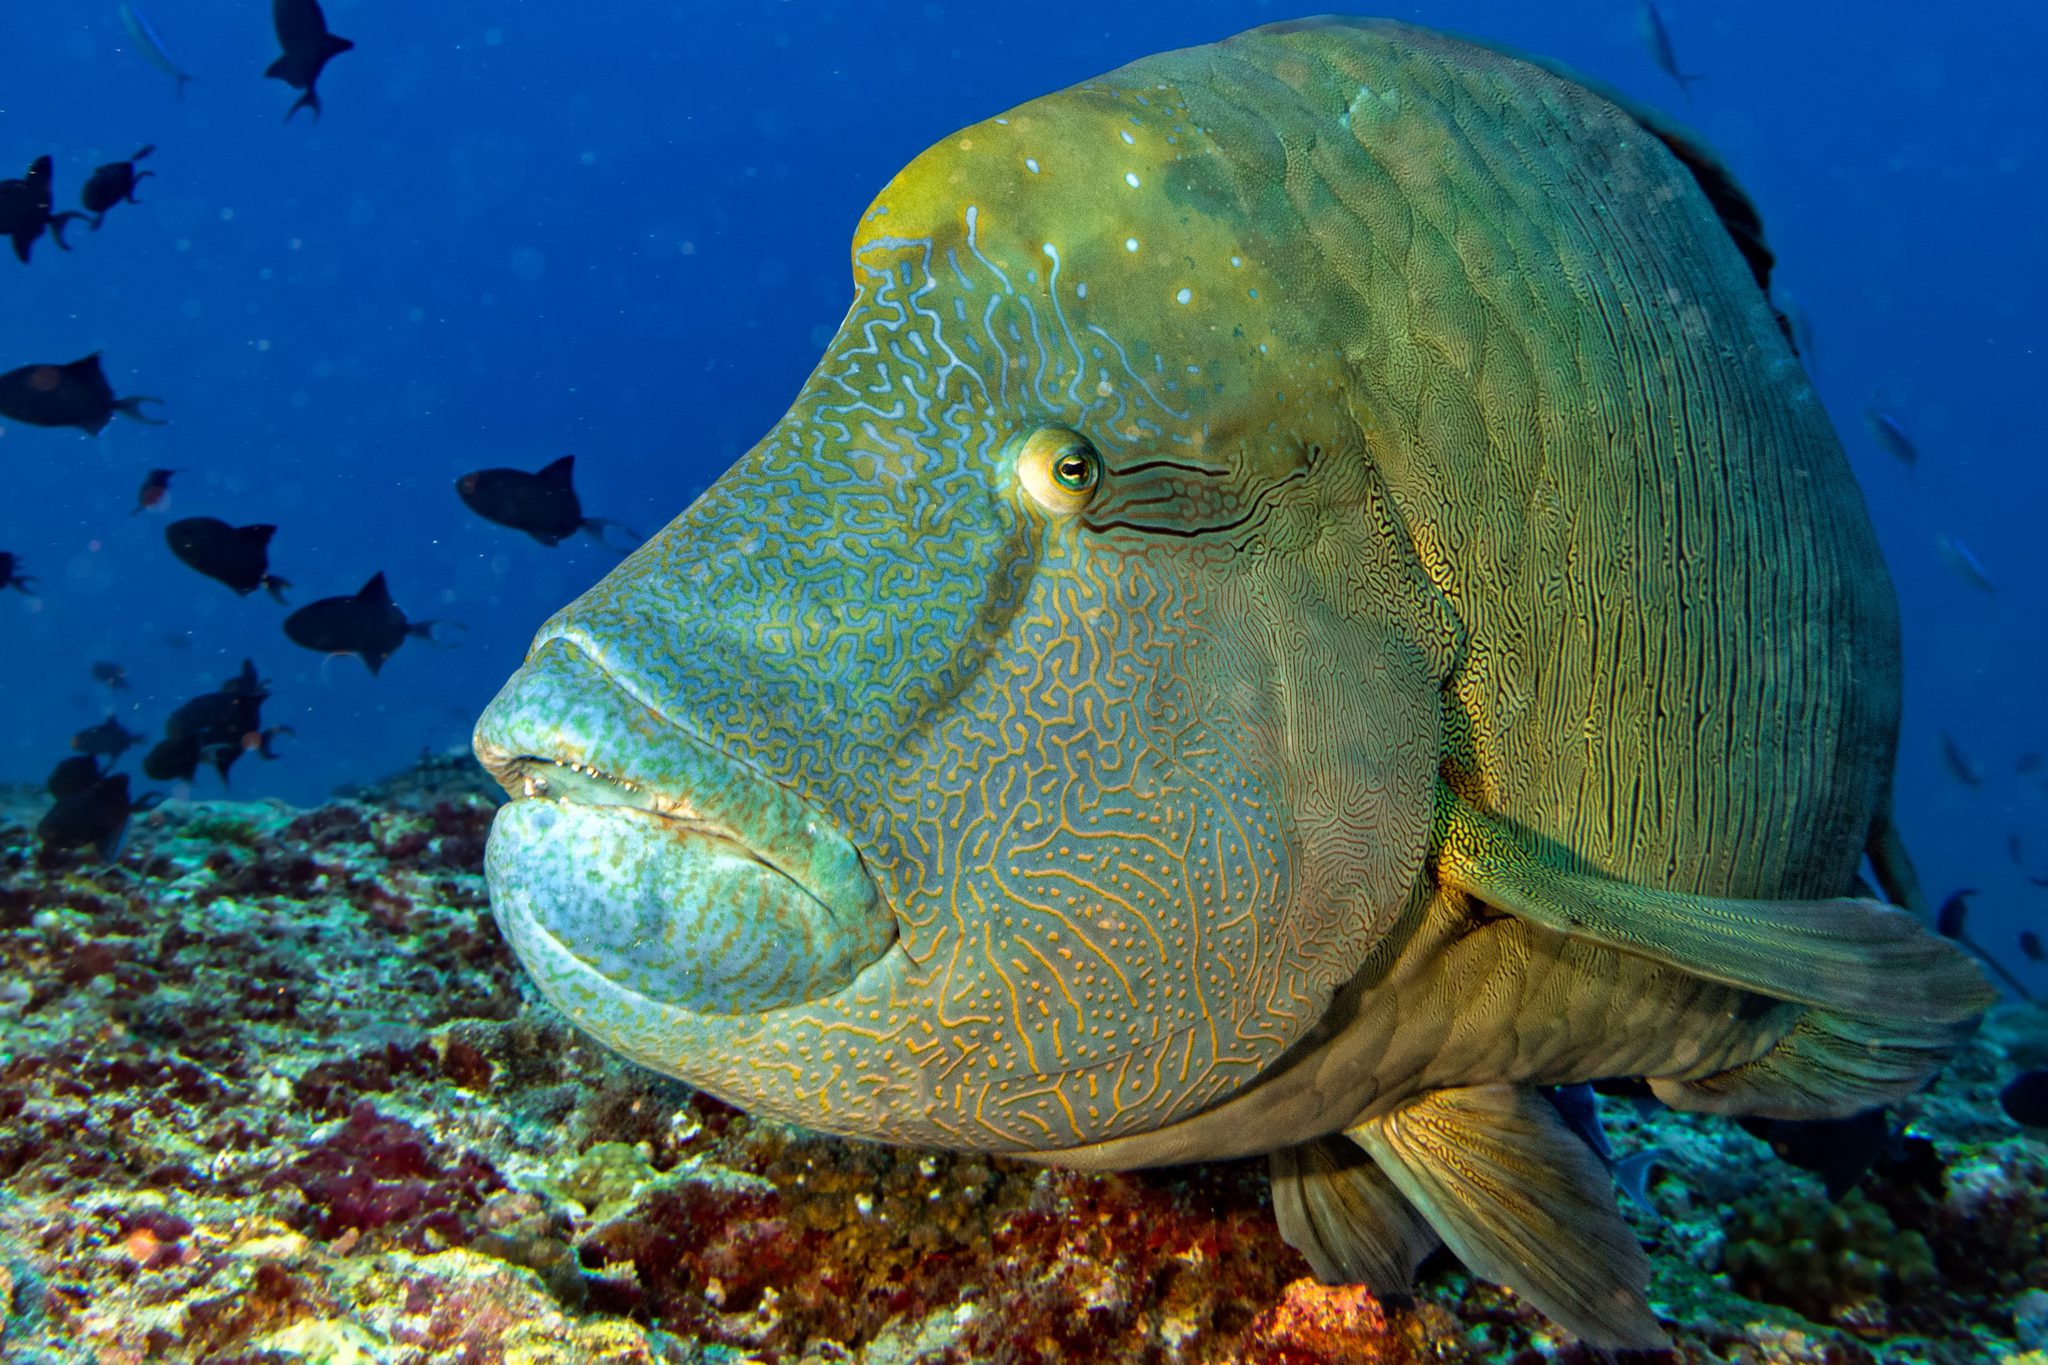 A close-up encounter with a Napoleon wrasse, one of many creatures to see while scuba diving from liveaboard boats in Palau